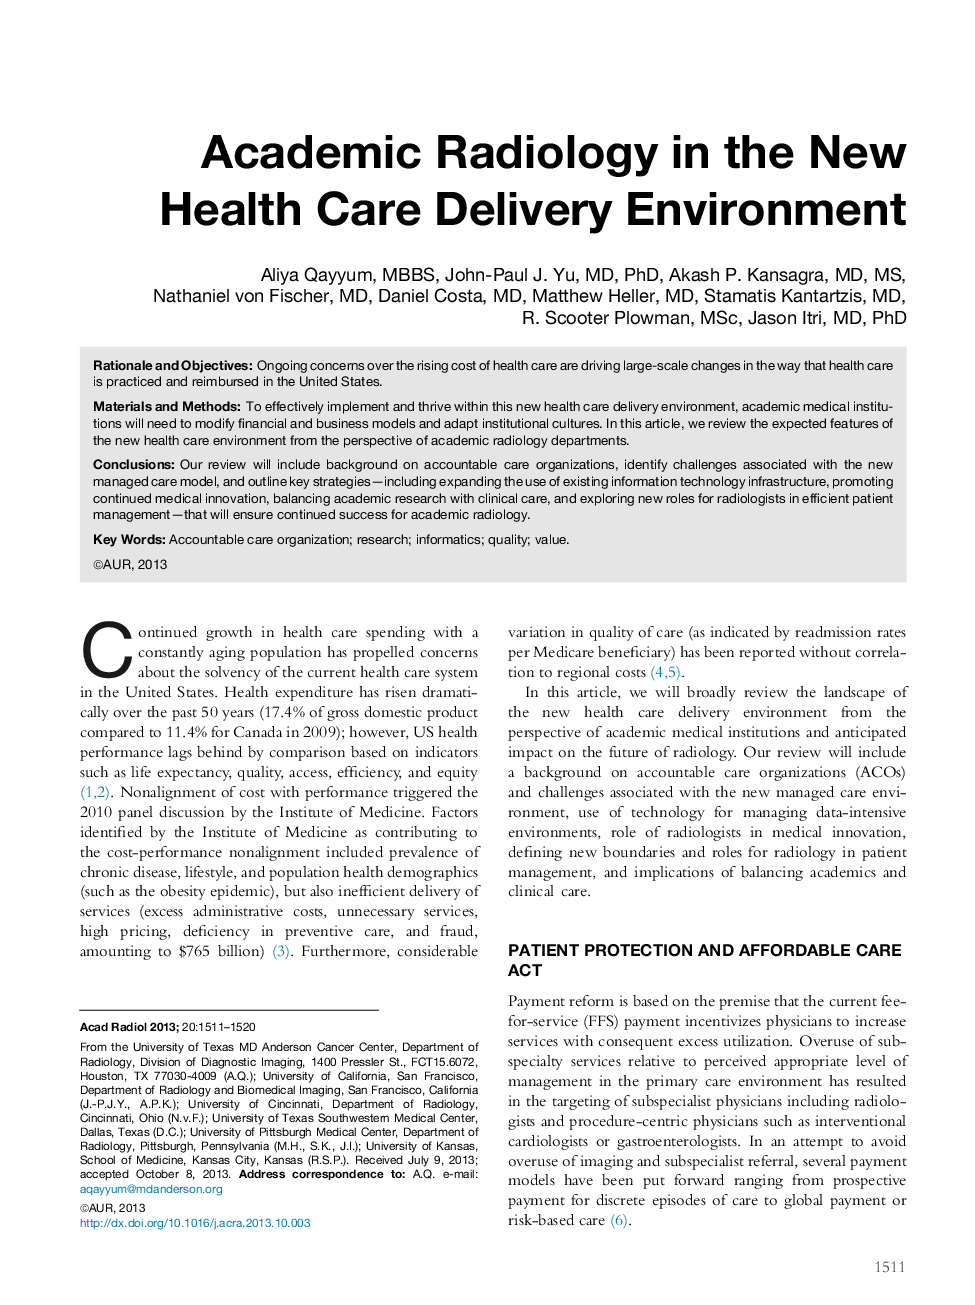 Academic Radiology in the New Health Care Delivery Environment